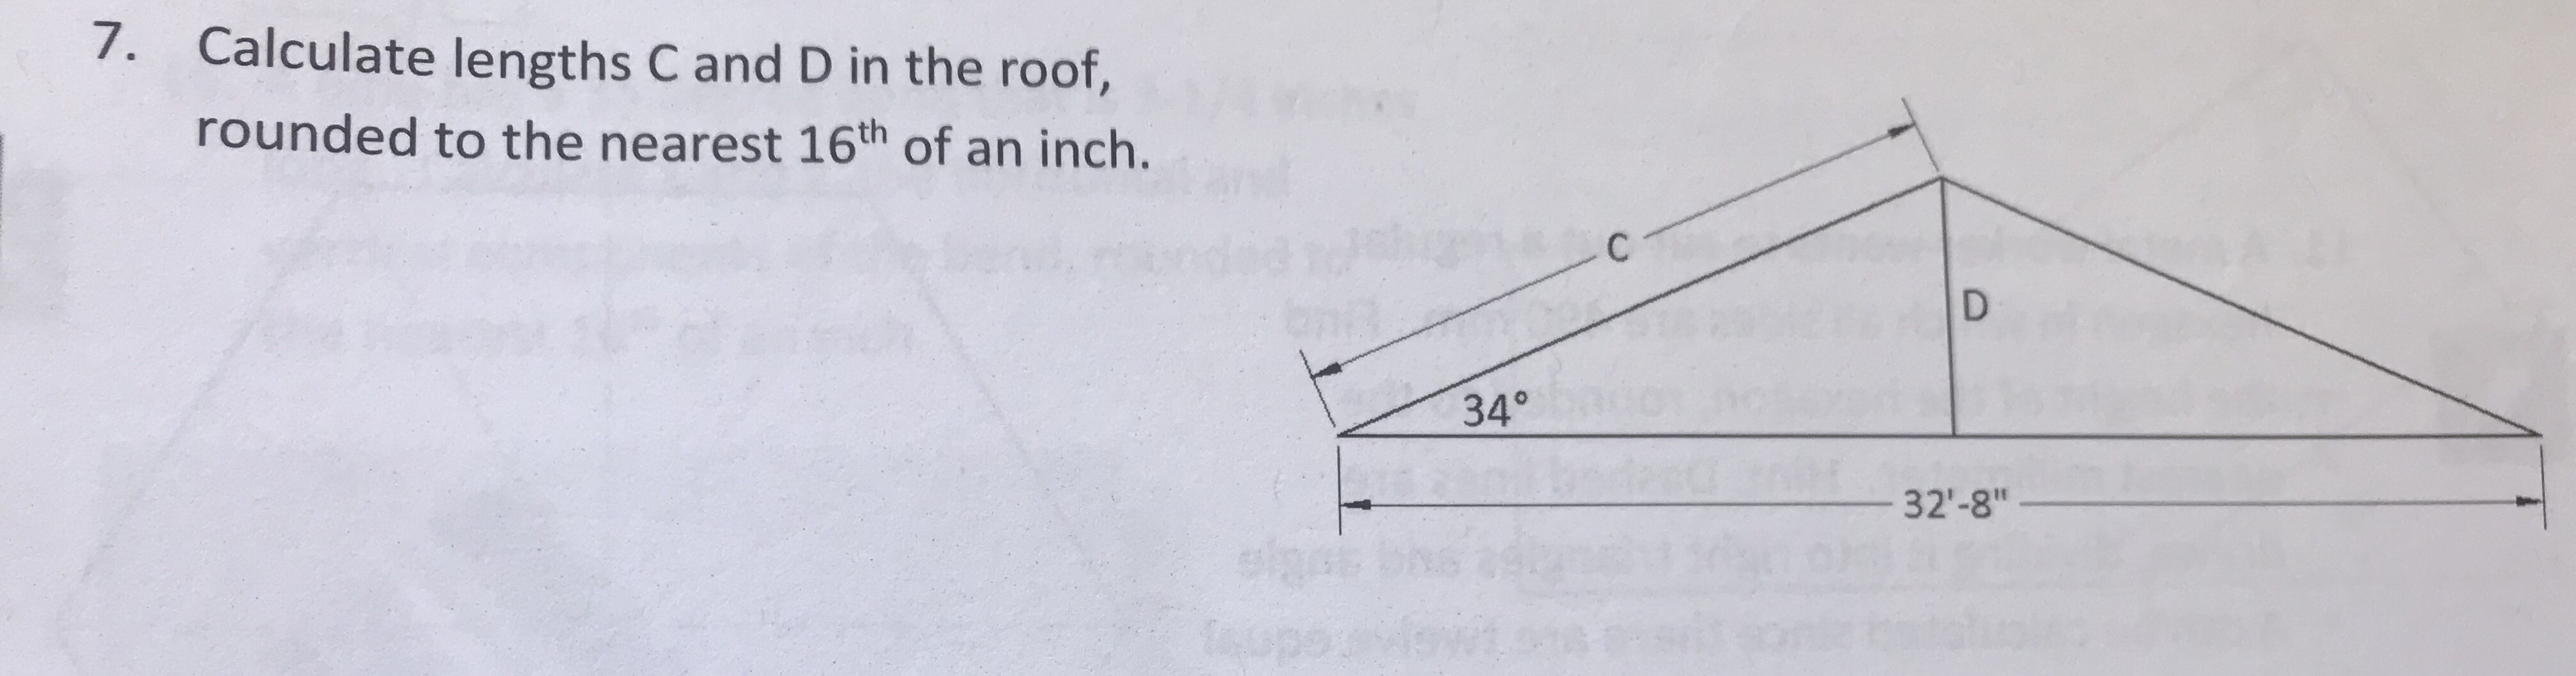 7.
Calculate lengths C and D in the roof,
rounded to the nearest 16th of an inch.
34°
32'-8"
